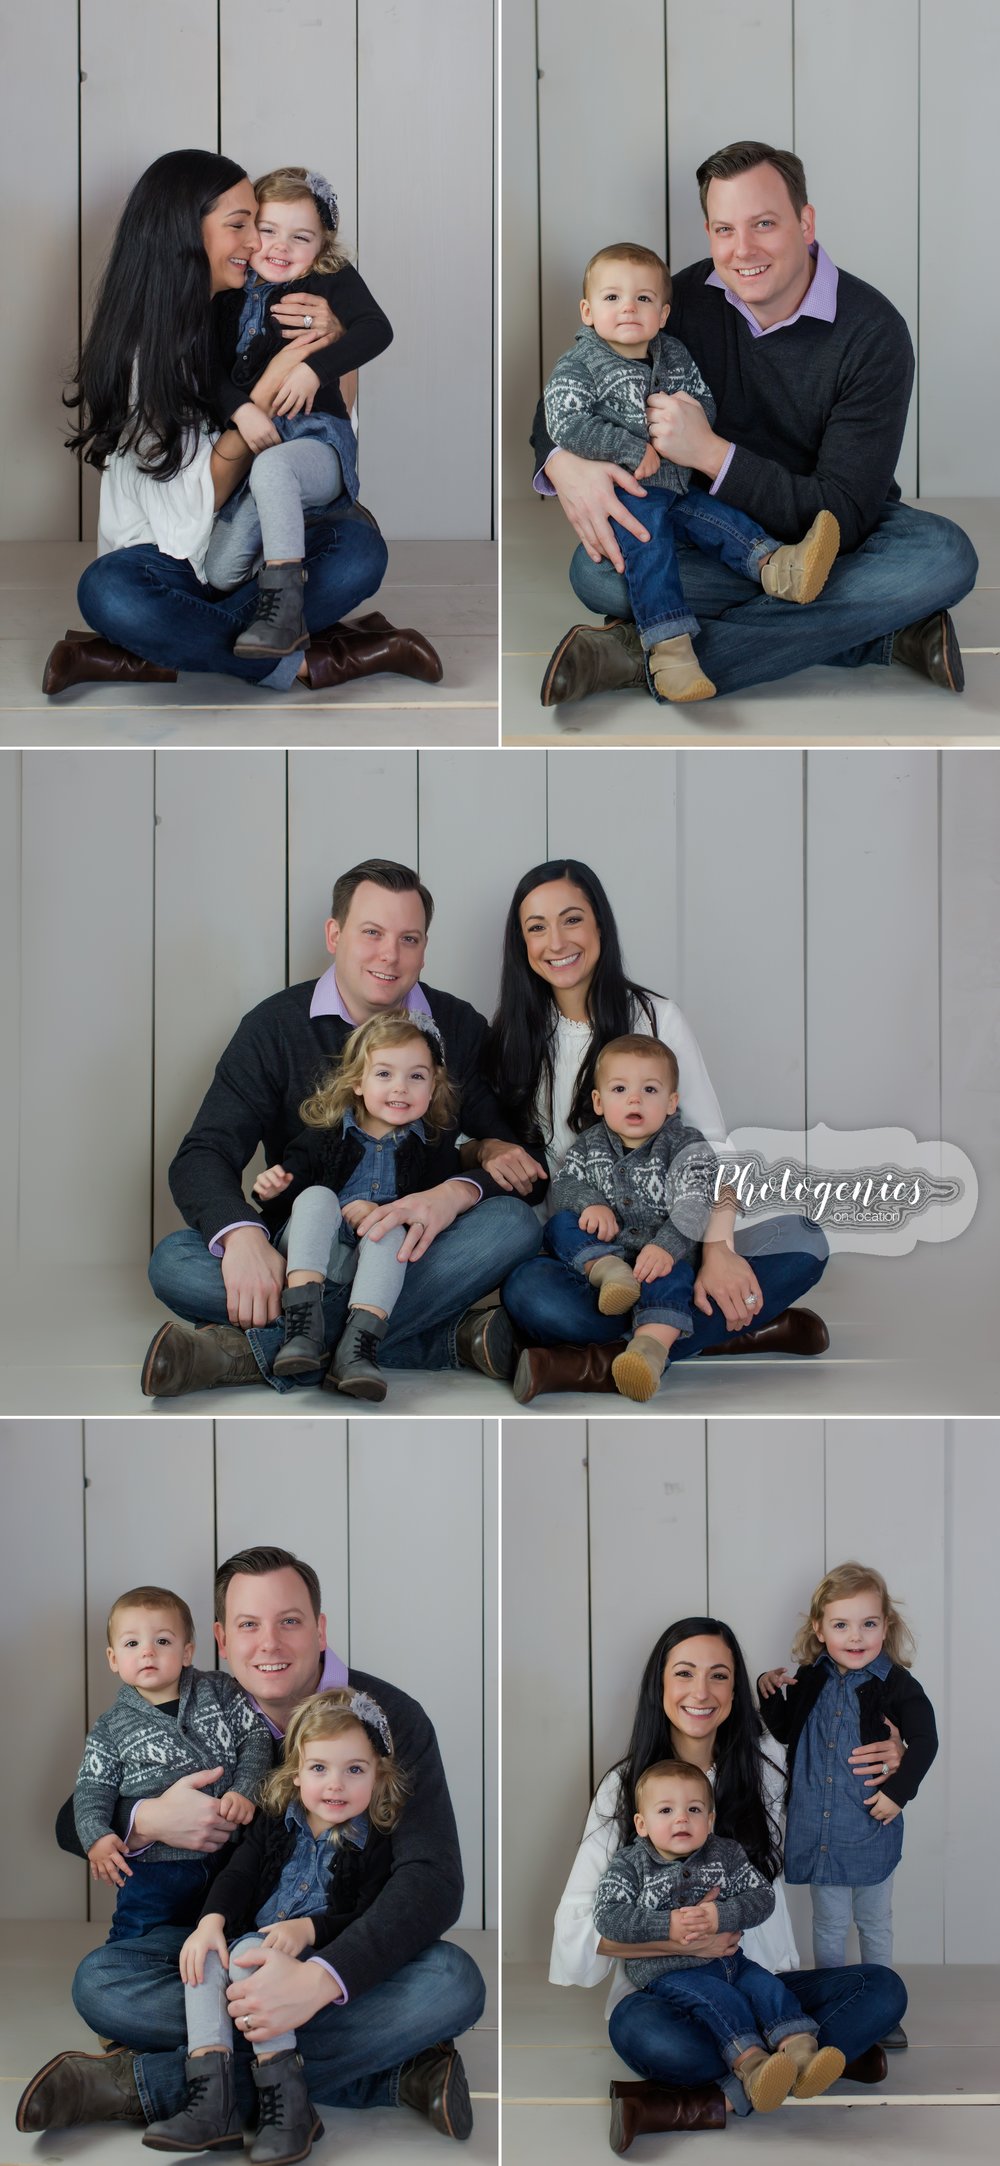  family_photography_studio_indoor_session_family_of_four_poses_sitting_ideas.jpg 